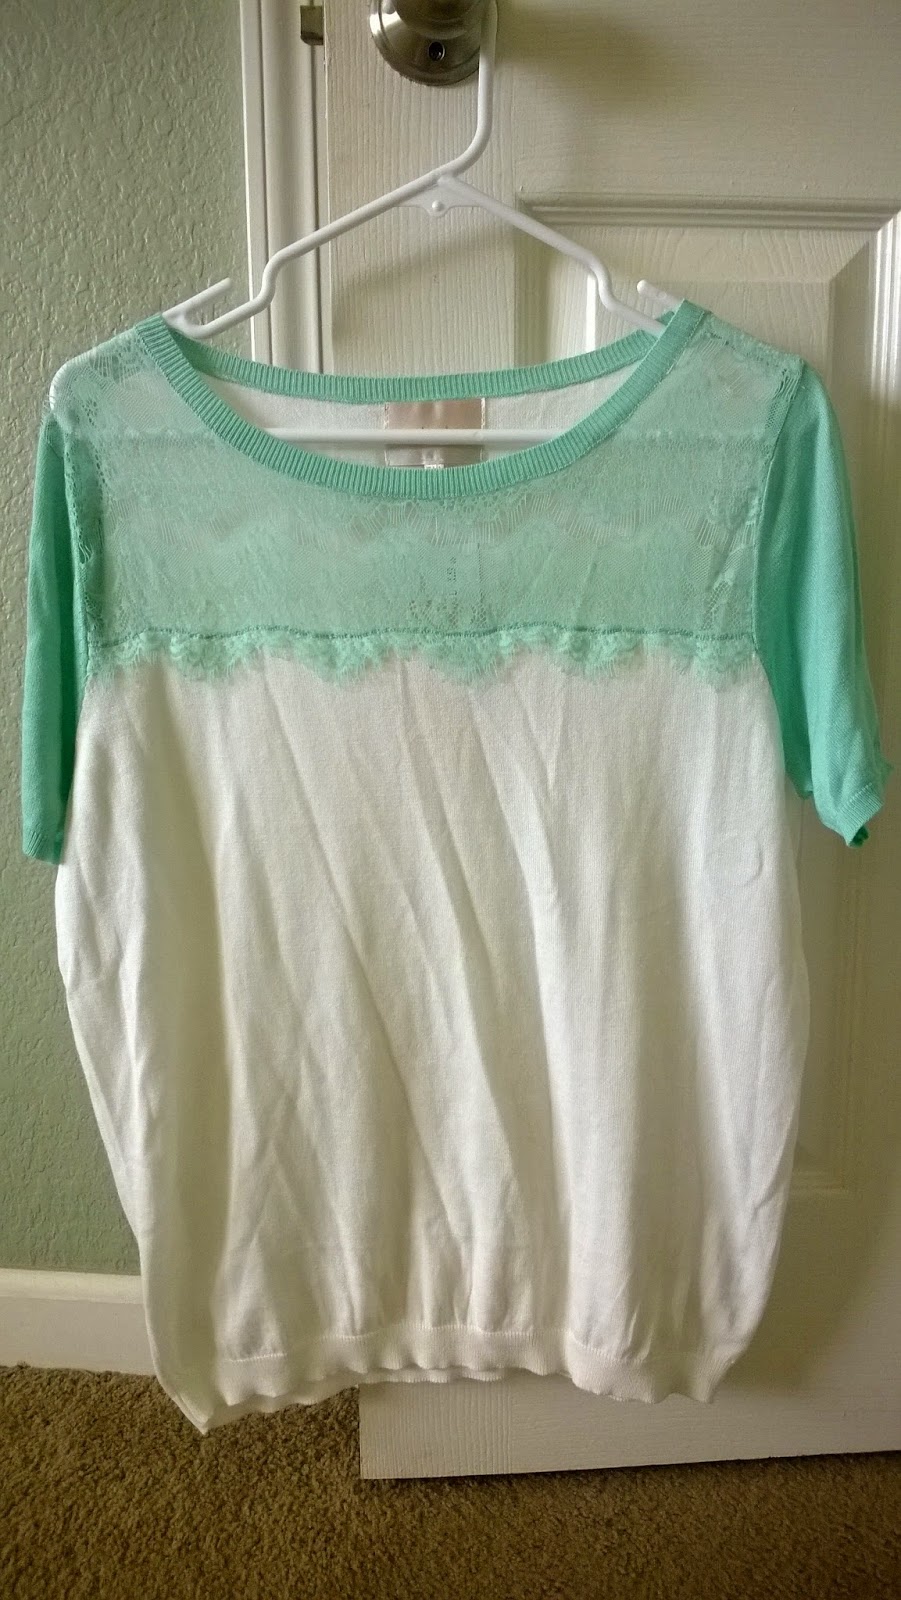 Nully Baby Blog: Stitch Fix Review #7